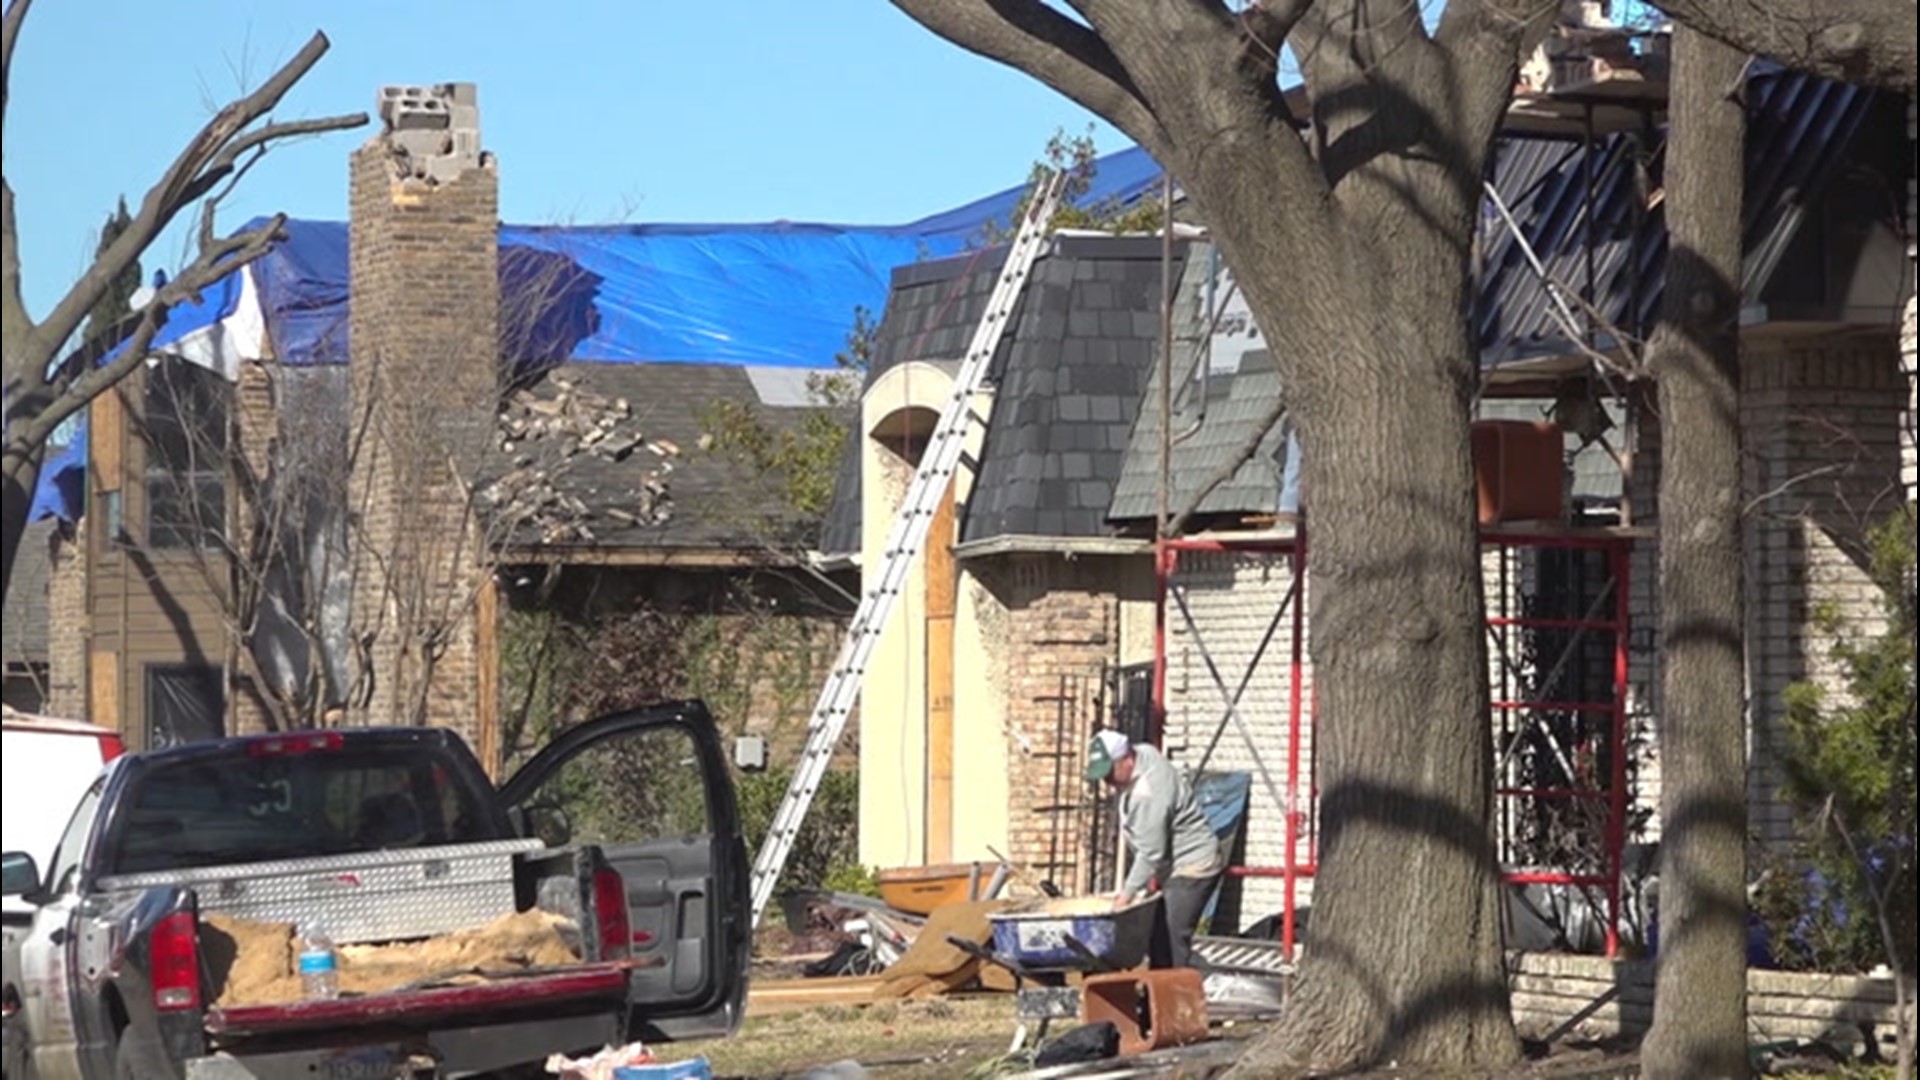 Contractors are busy repairing homes and demolishing parts of a damaged shopping plaza on Feb. 24, roughly four months after an EF-3 tornado tore through the Preston Hollow neighborhood in Dallas, Texas.